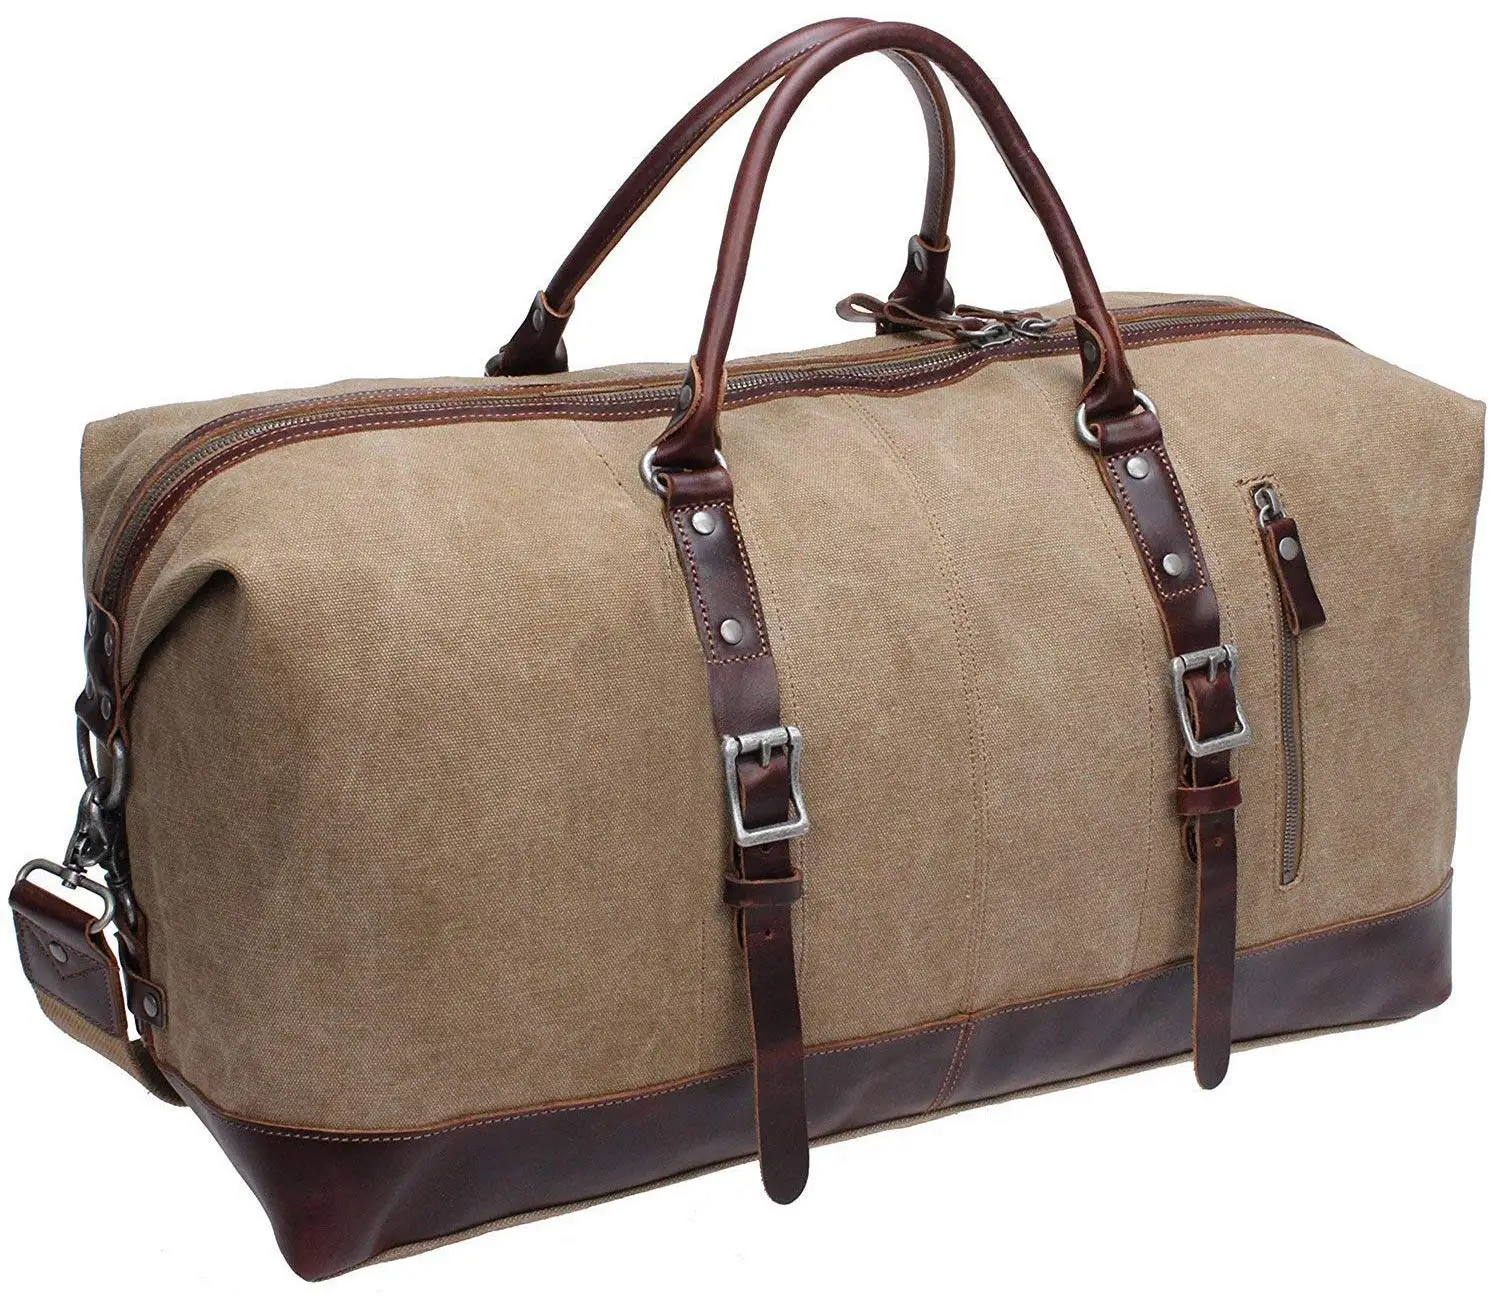 Canvas Leather Duffle Bag Extra Large Travel Tote Weekender Carry On ...